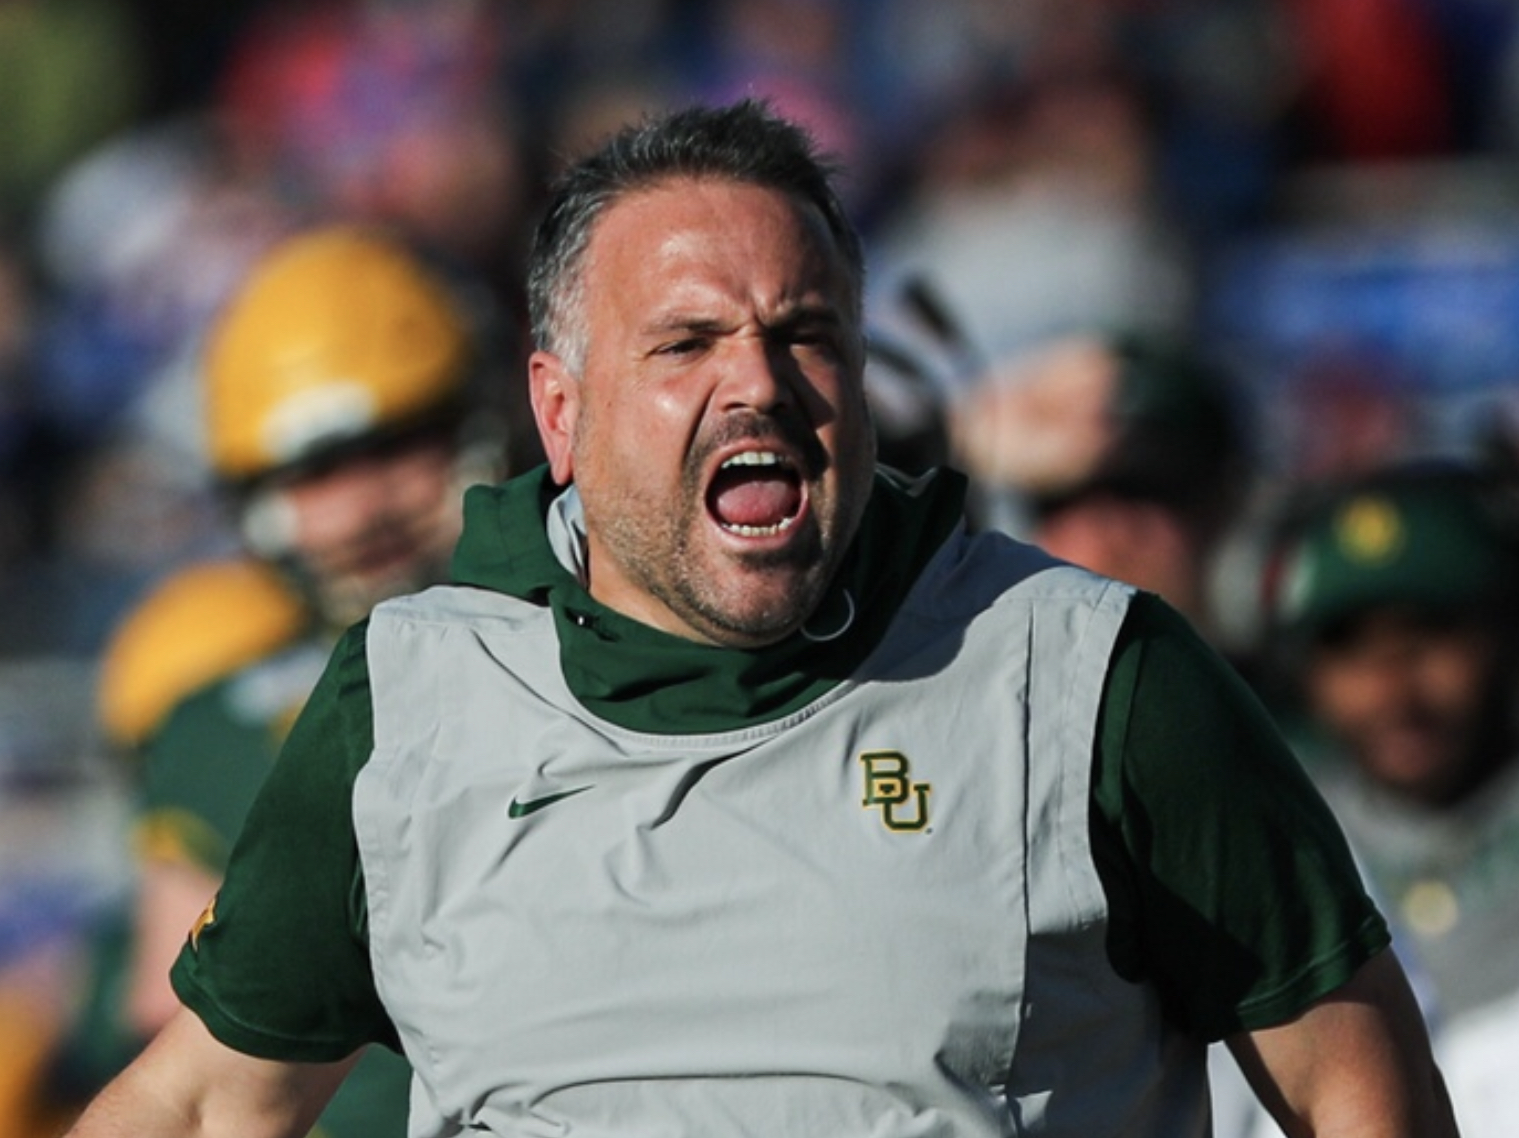 Hypocritical Matt Rhule quote making its rounds after move to the NFL